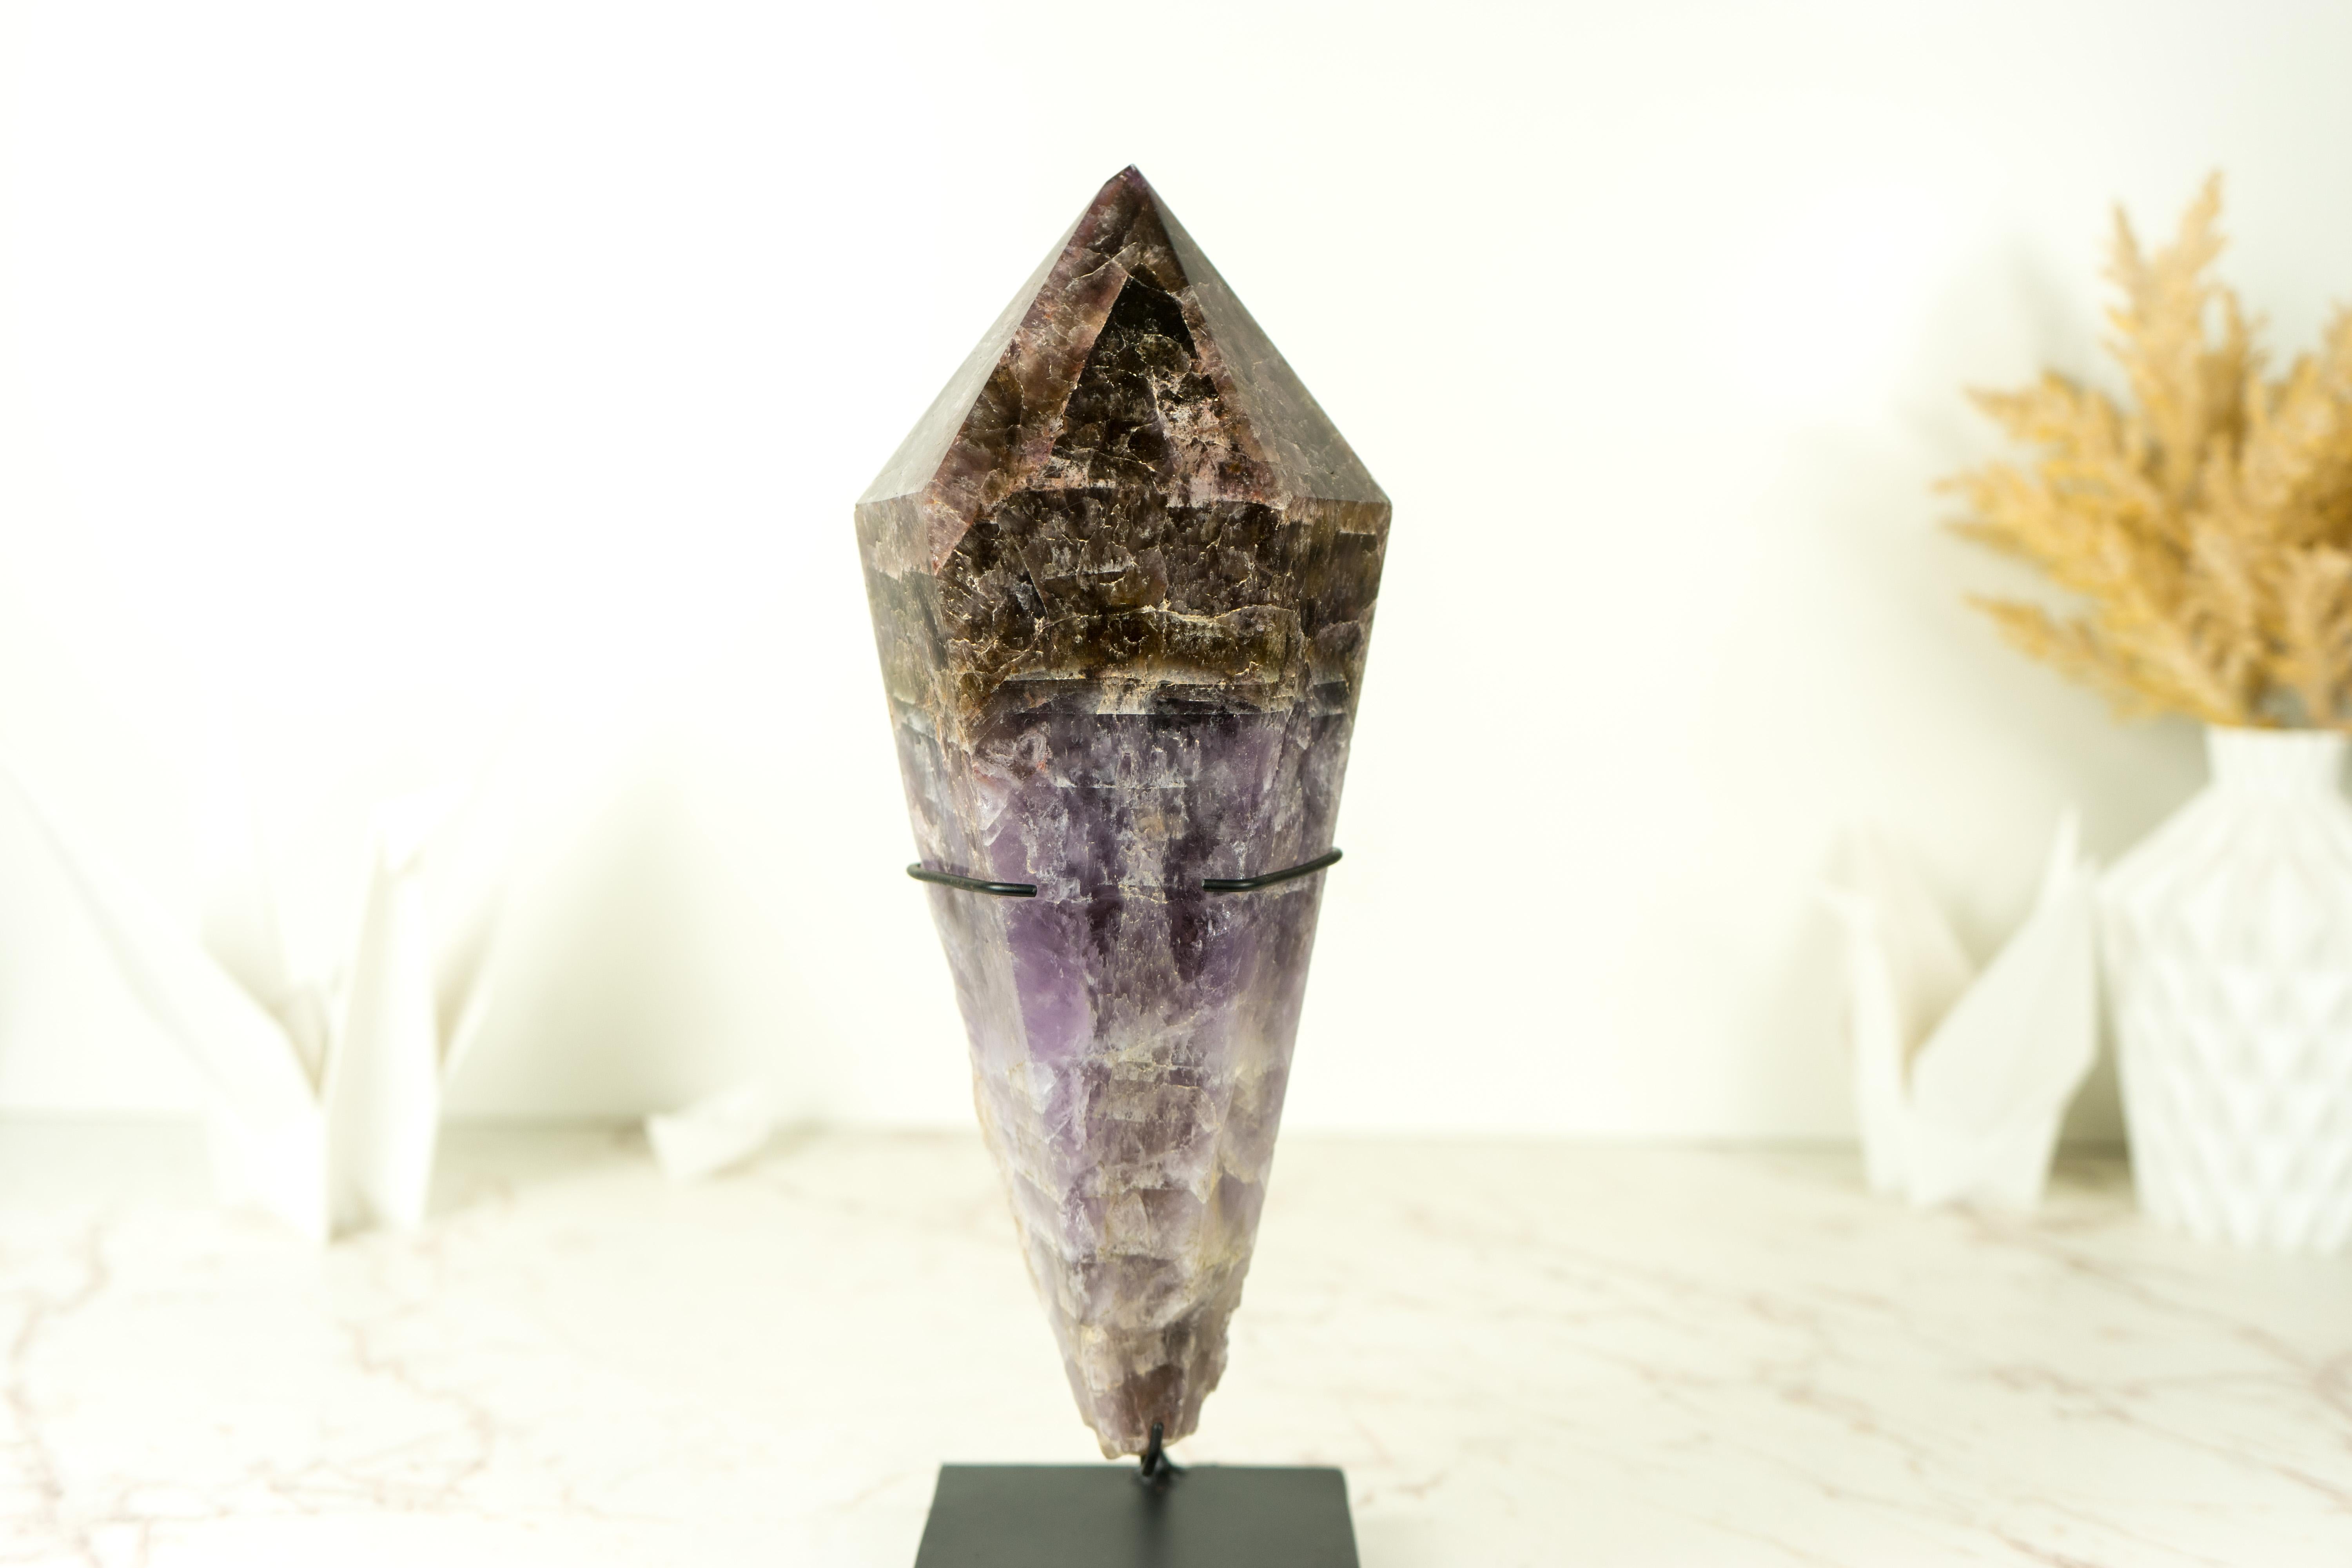 A Large and Long Super Seven Scepter Generator, this self-standing point is a remarkable specimen that showcases both impressive size and unique characteristics. This Super 7 crystal brings beautiful colors on a X-Large point and it's not only a